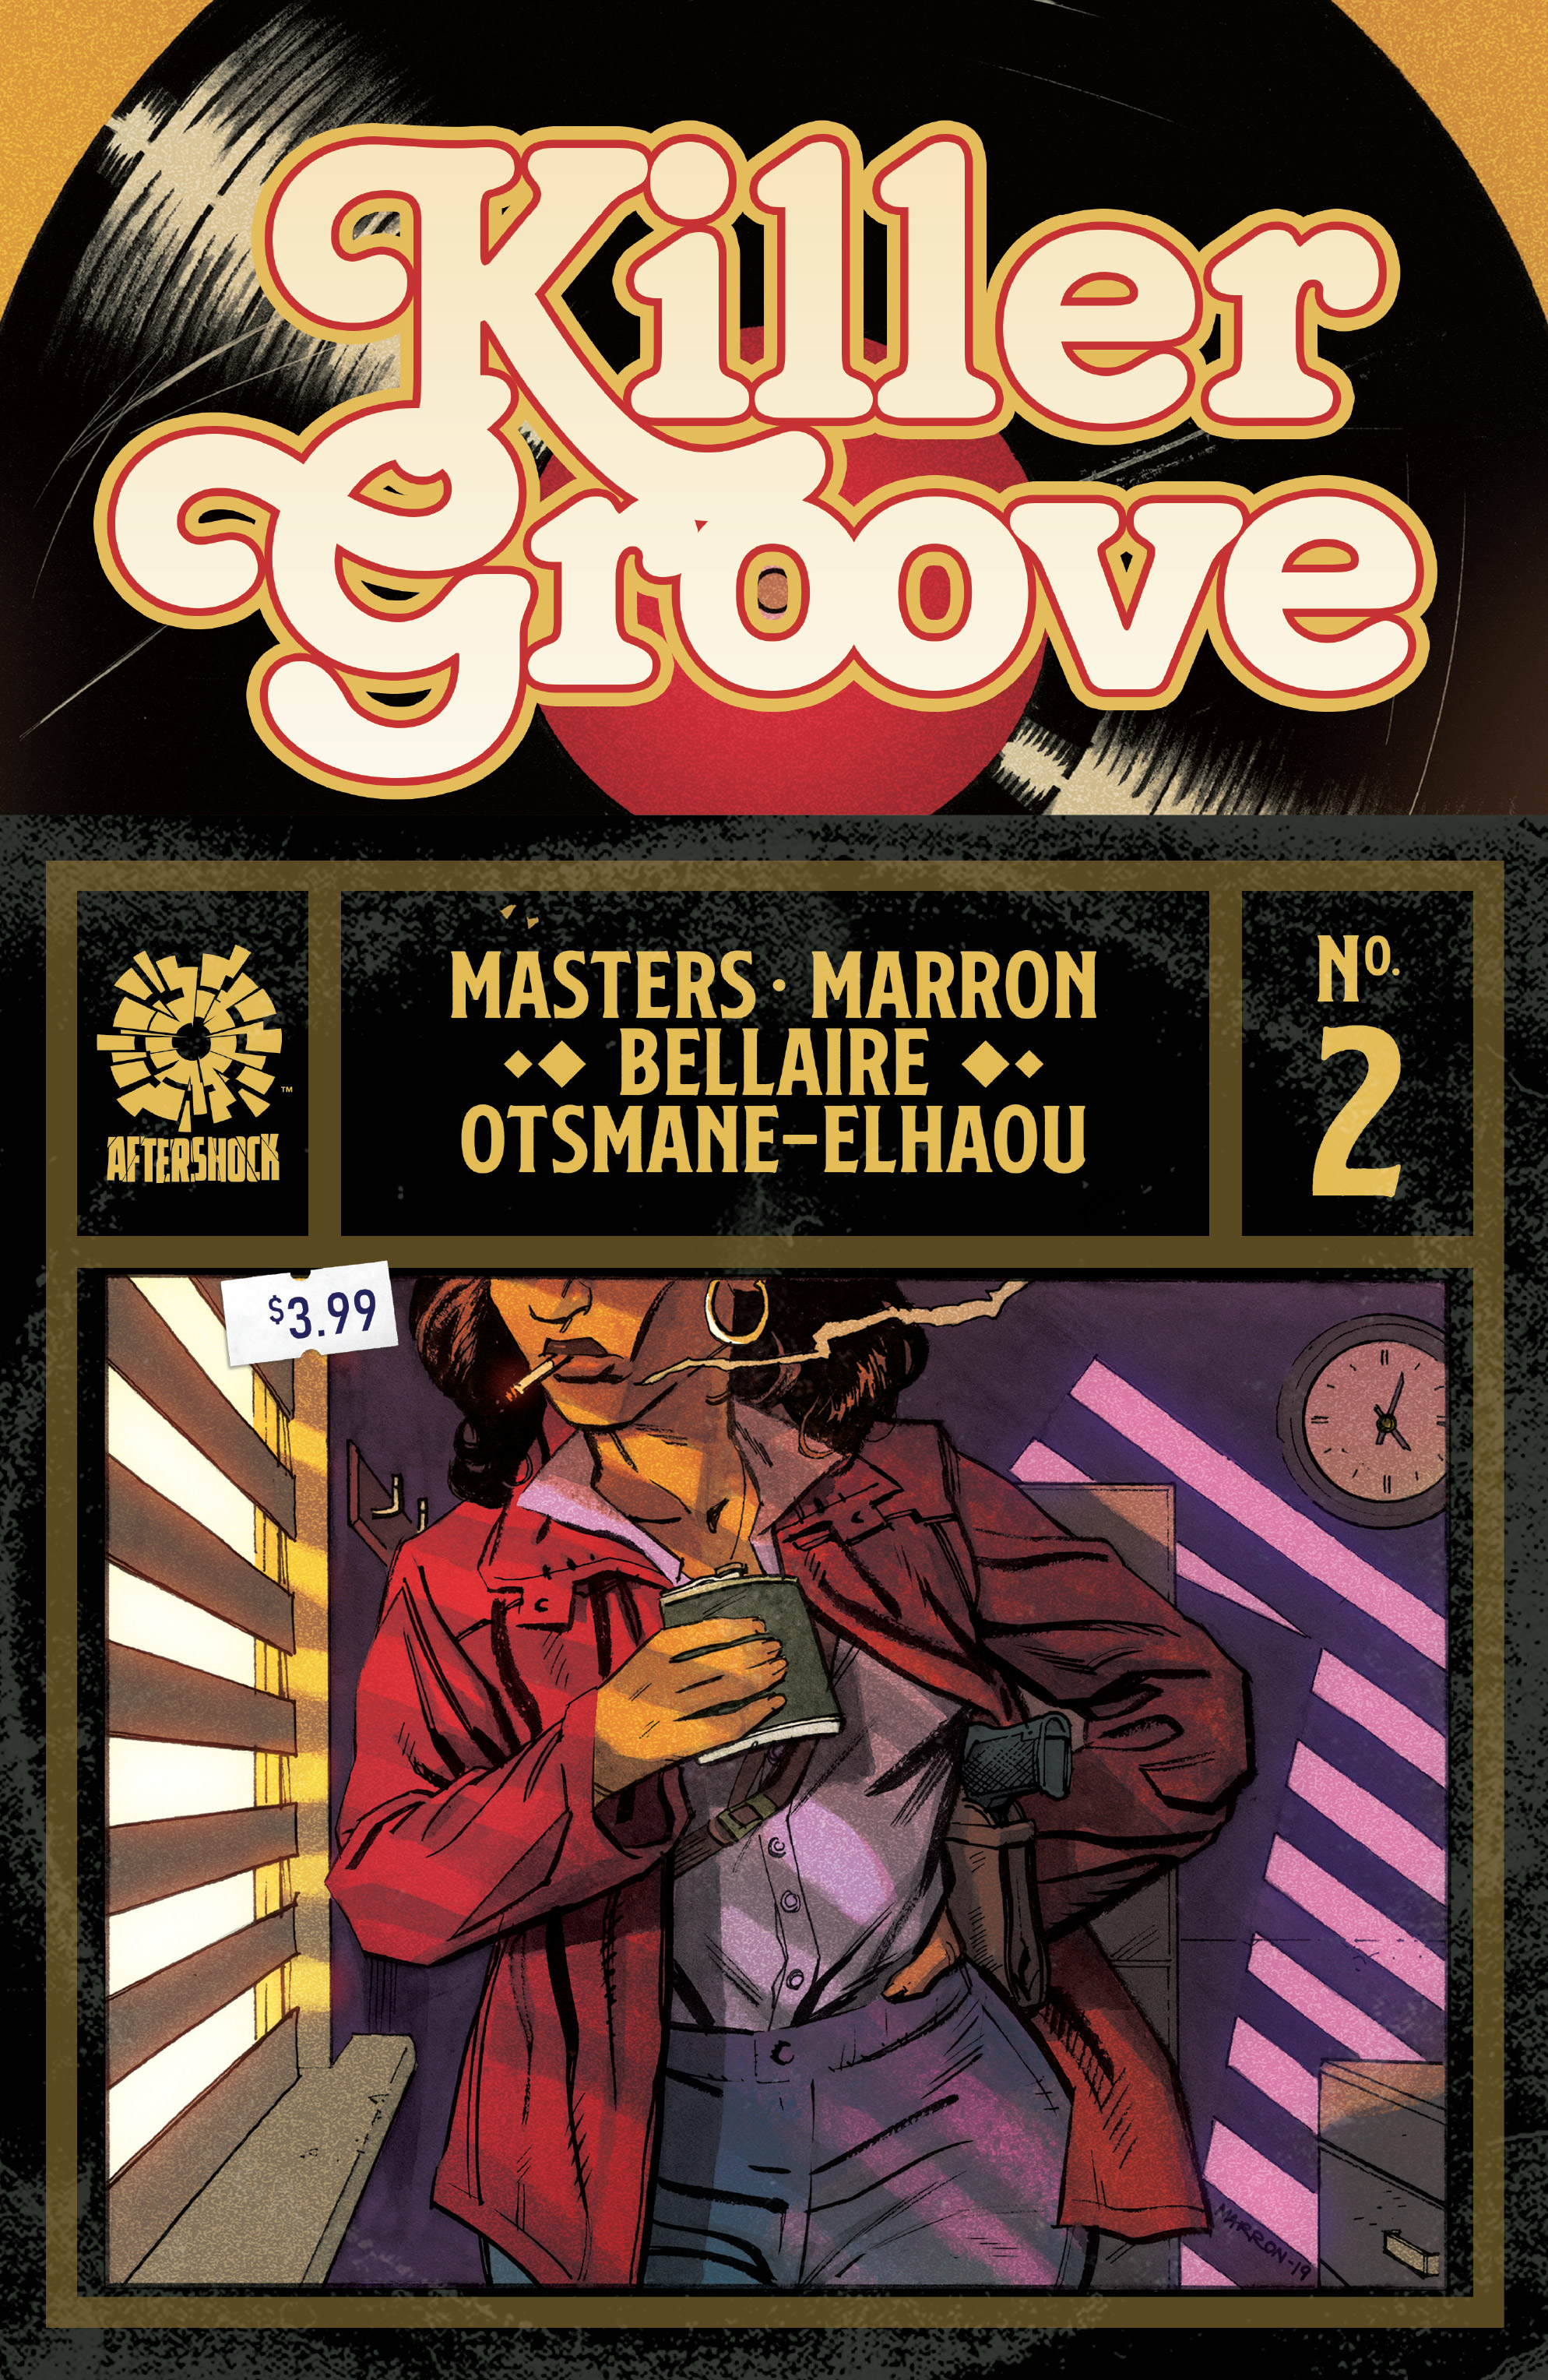 Read online Killer Groove comic -  Issue #2 - 1